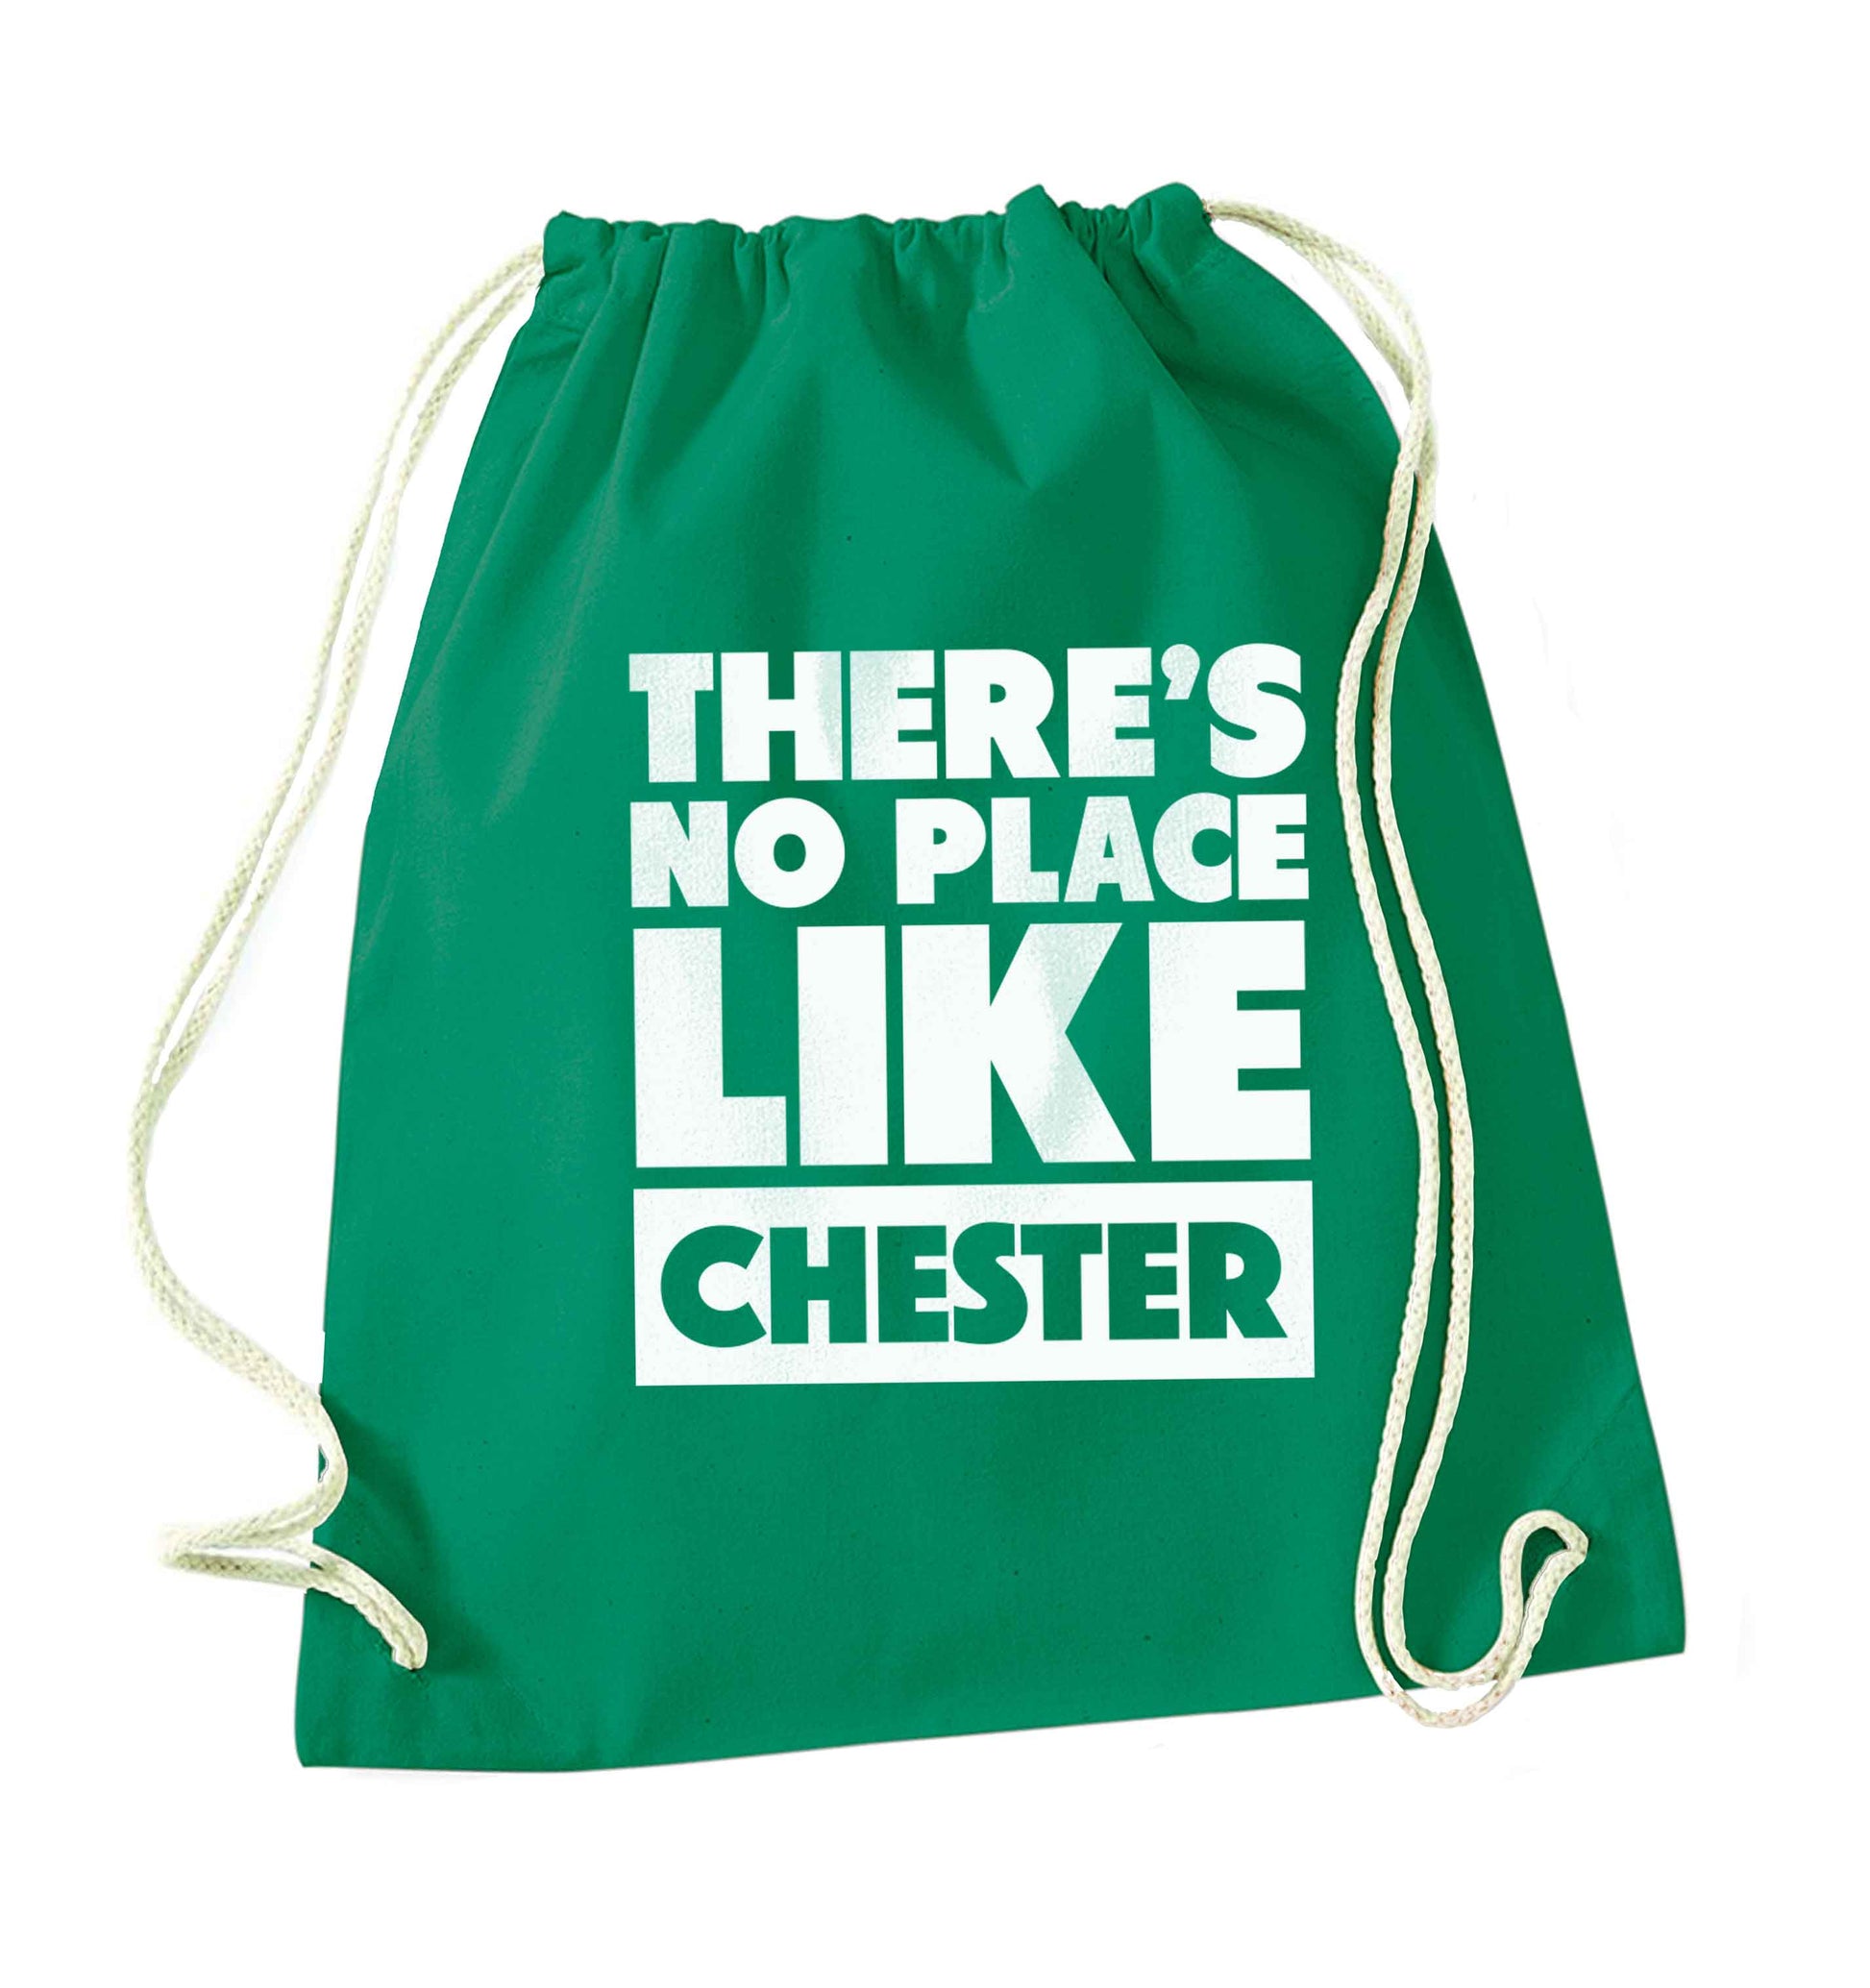 There's no place like Chester green drawstring bag